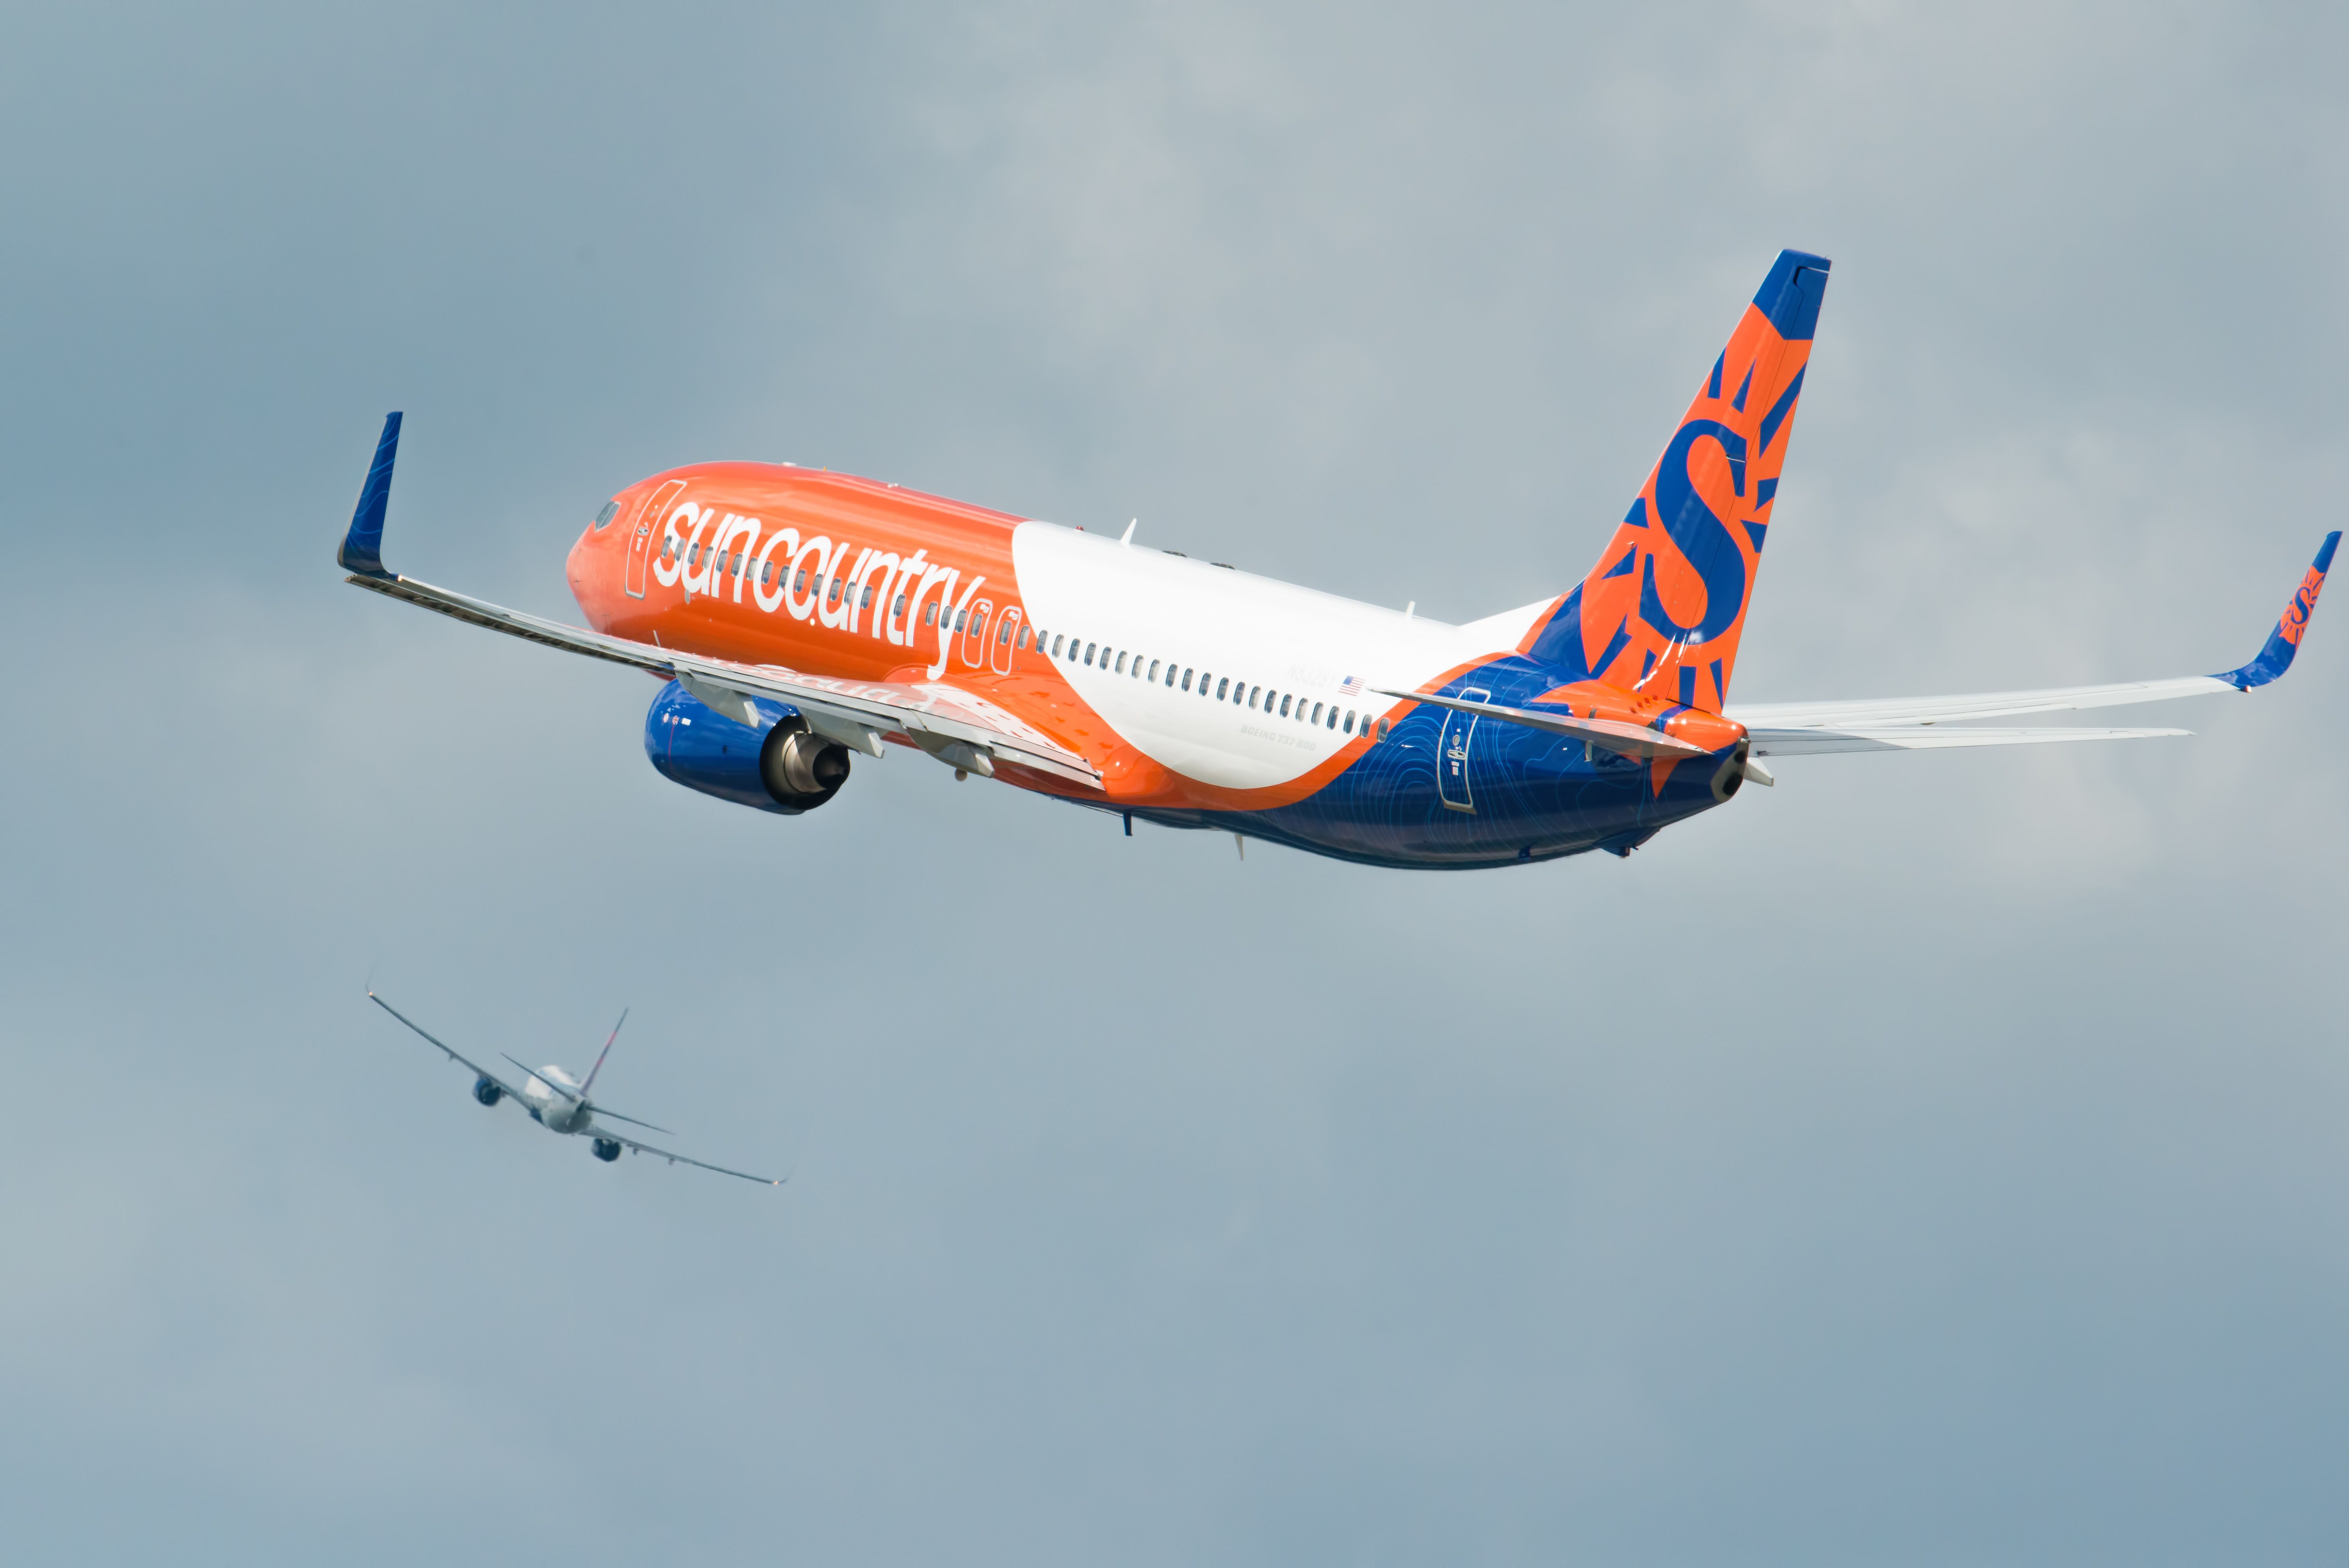 A Sun Country Airlines aircraft flying in the sky.